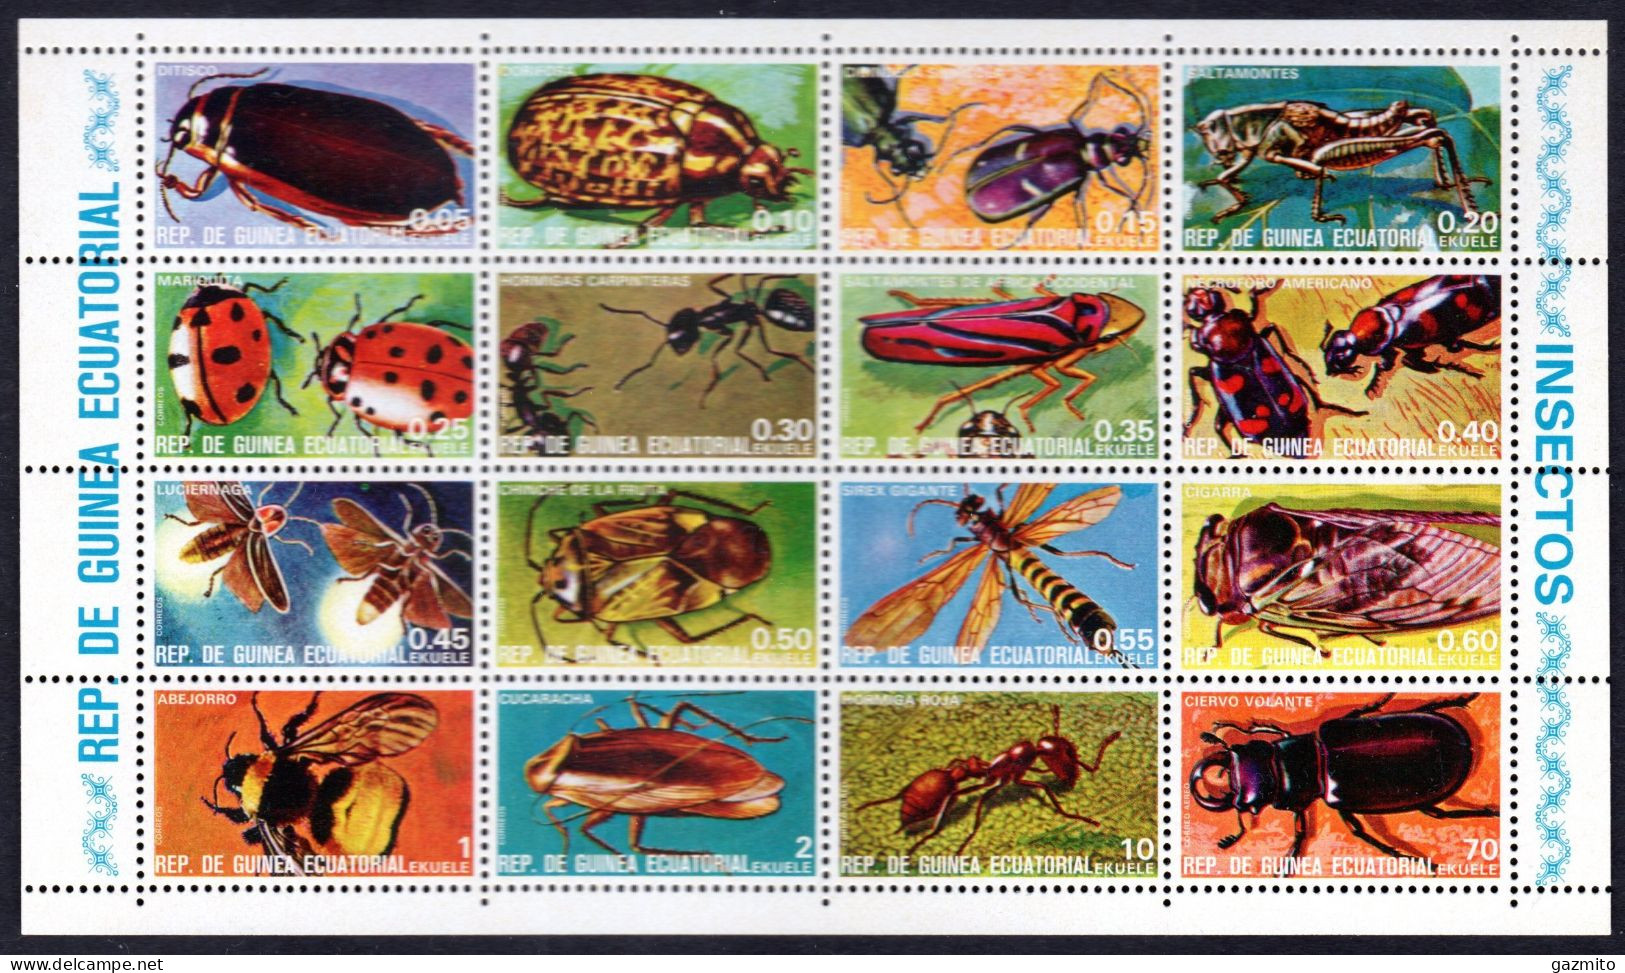 Guinea Equat. 1978, Insects, Sheetlet - Coléoptères